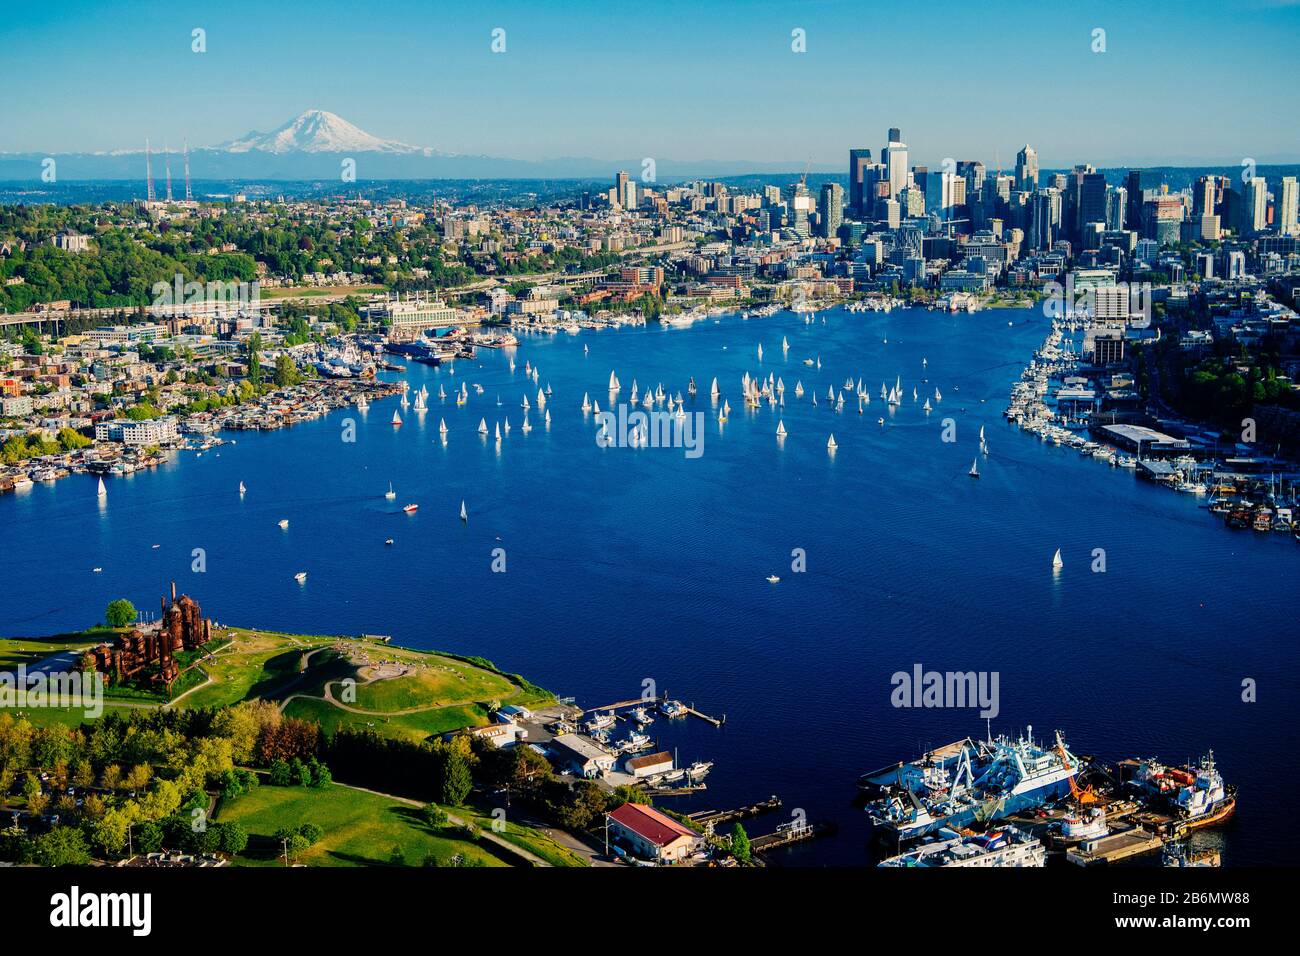 Aerial view of Seattle with regatta in Eagle Harbor, Washington State, USA Stock Photo